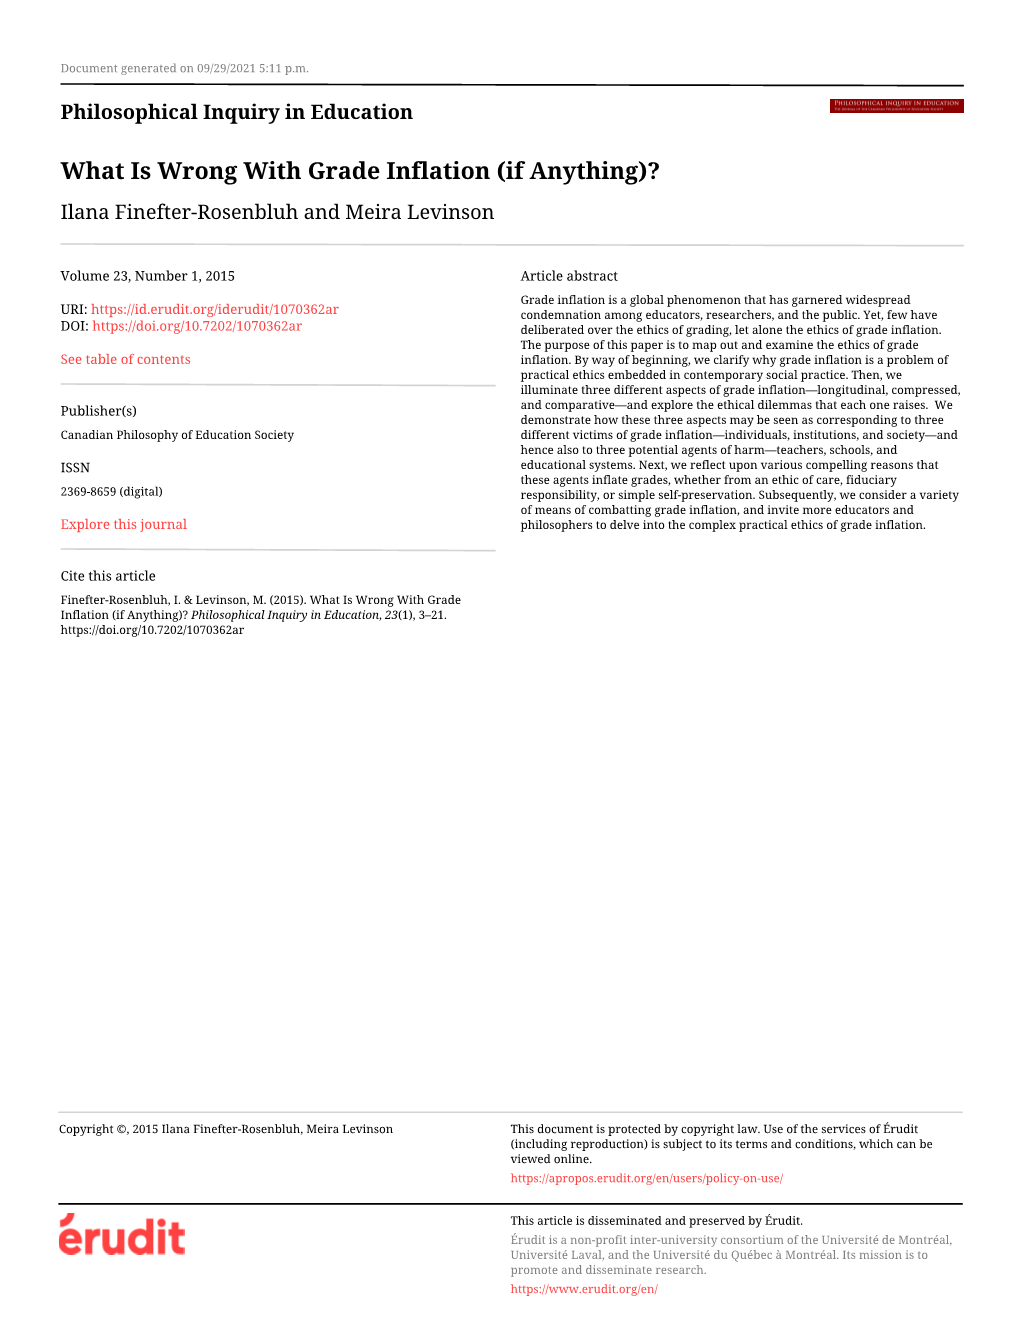 What Is Wrong with Grade Inflation (If Anything)? Ilana Finefter-Rosenbluh and Meira Levinson